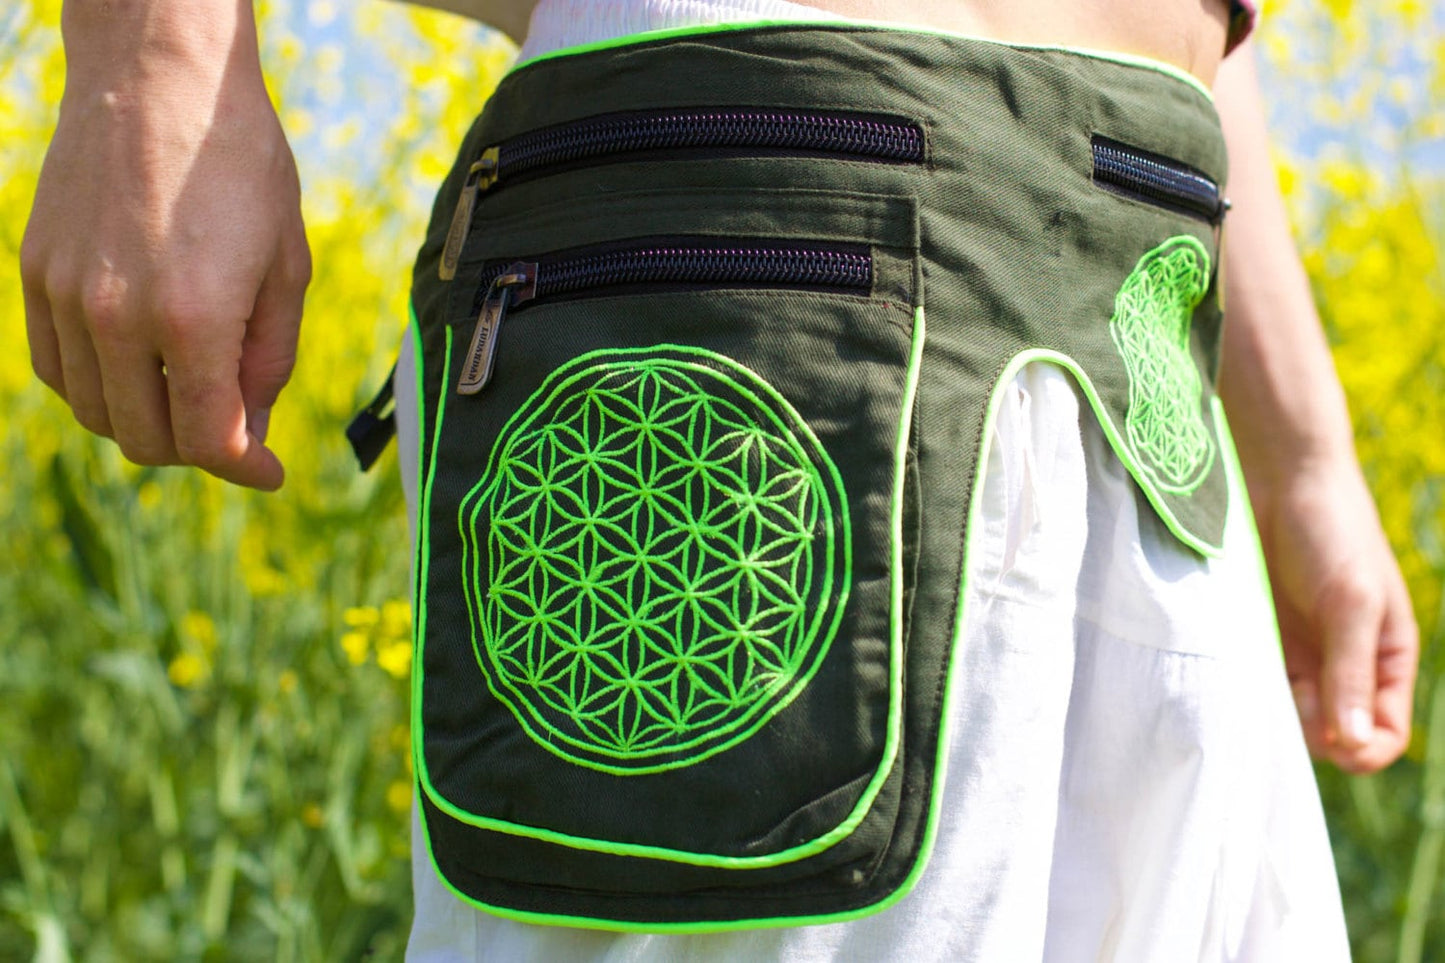 Beltbag green Flower of Life- 7 pockets strong ziplocks size adjustable with hook & loop and clip - blacklight active holy geometry